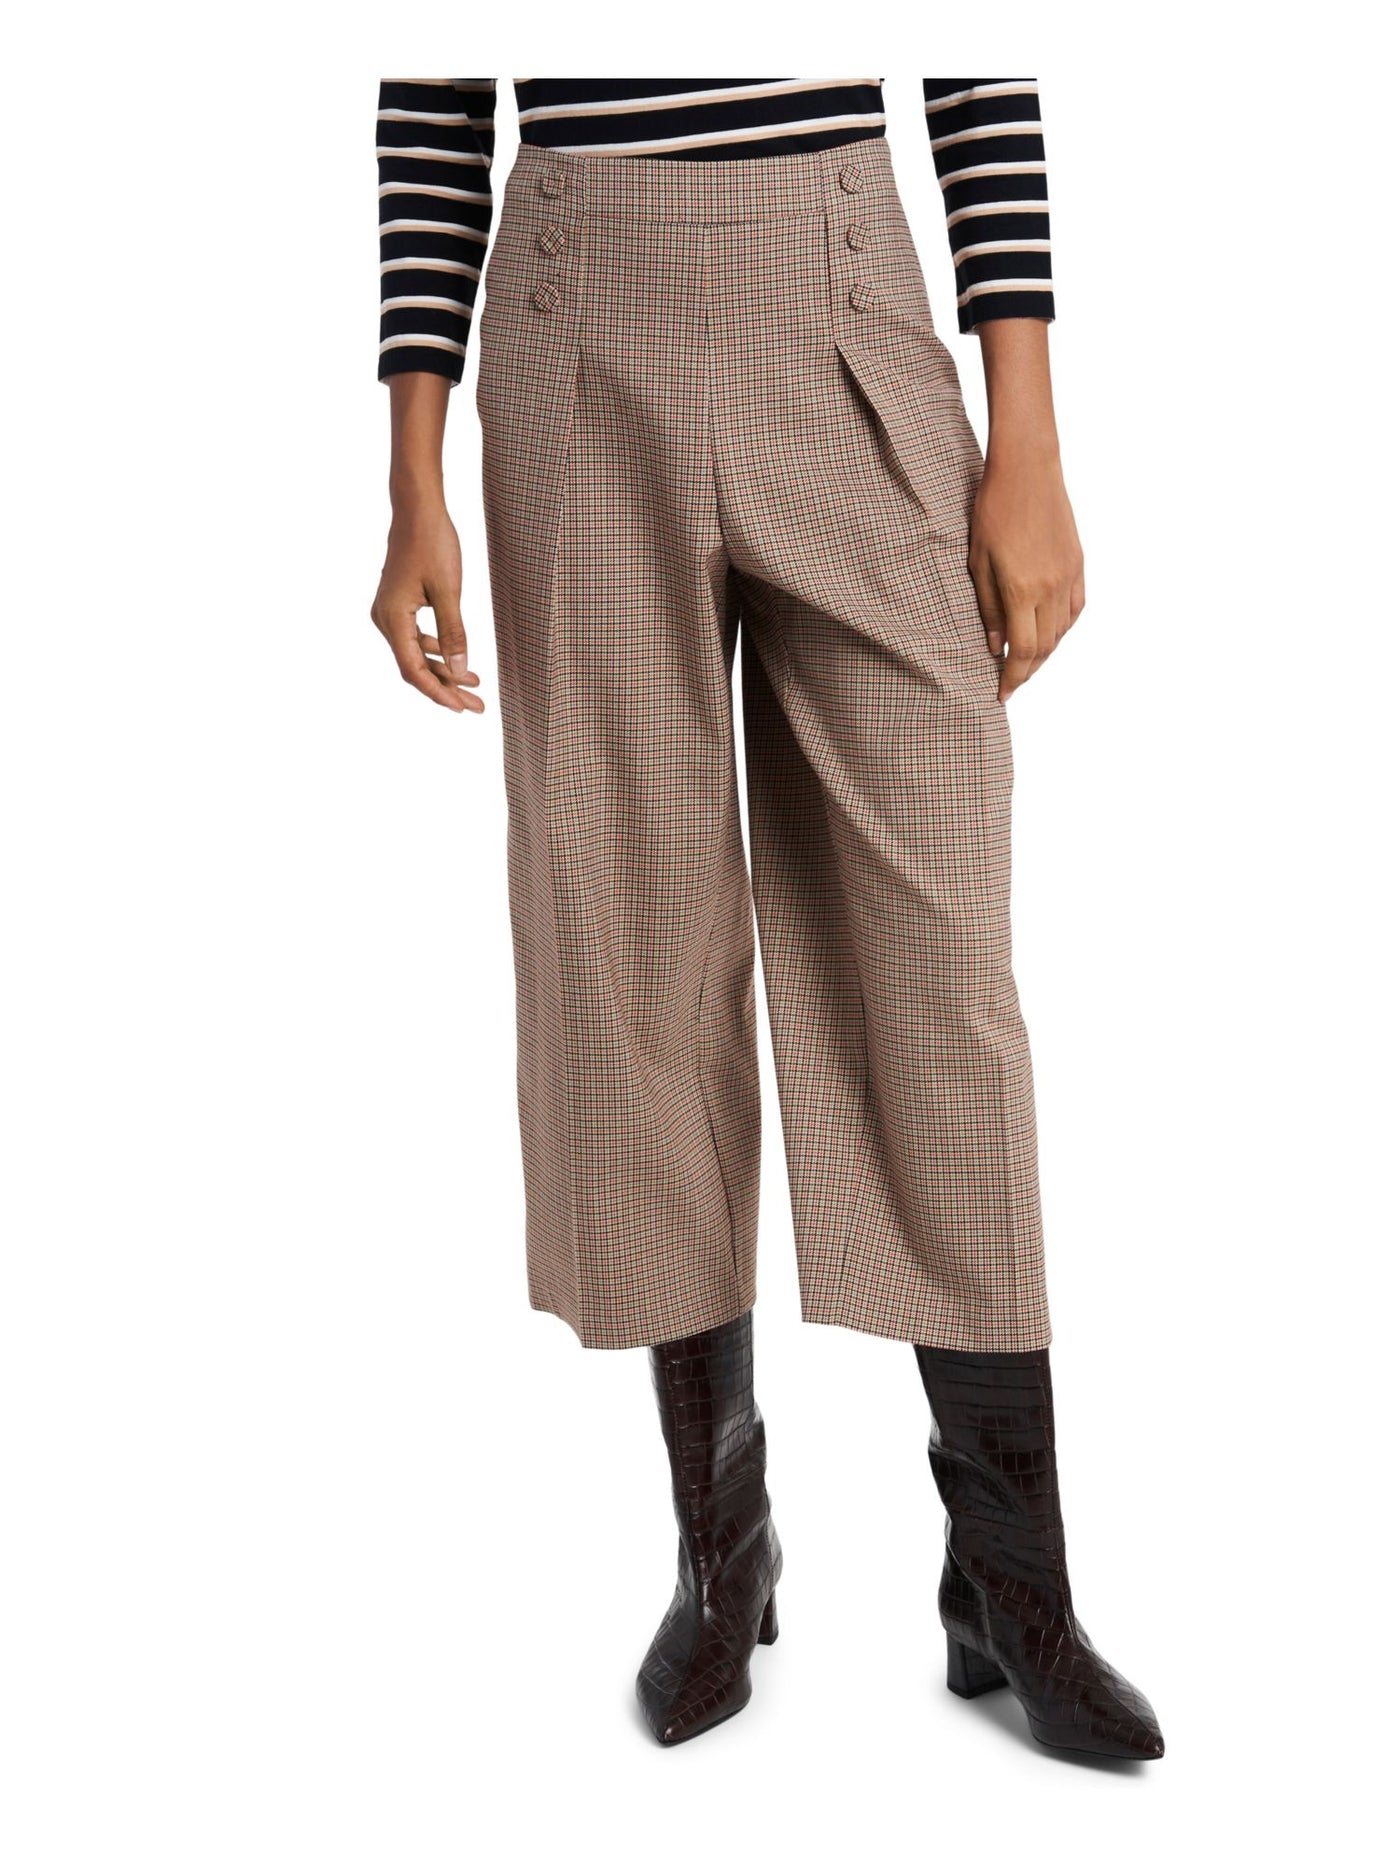 RILEY&RAE Womens Beige Zippered Pocketed Culottes Check Wear To Work Pants 0